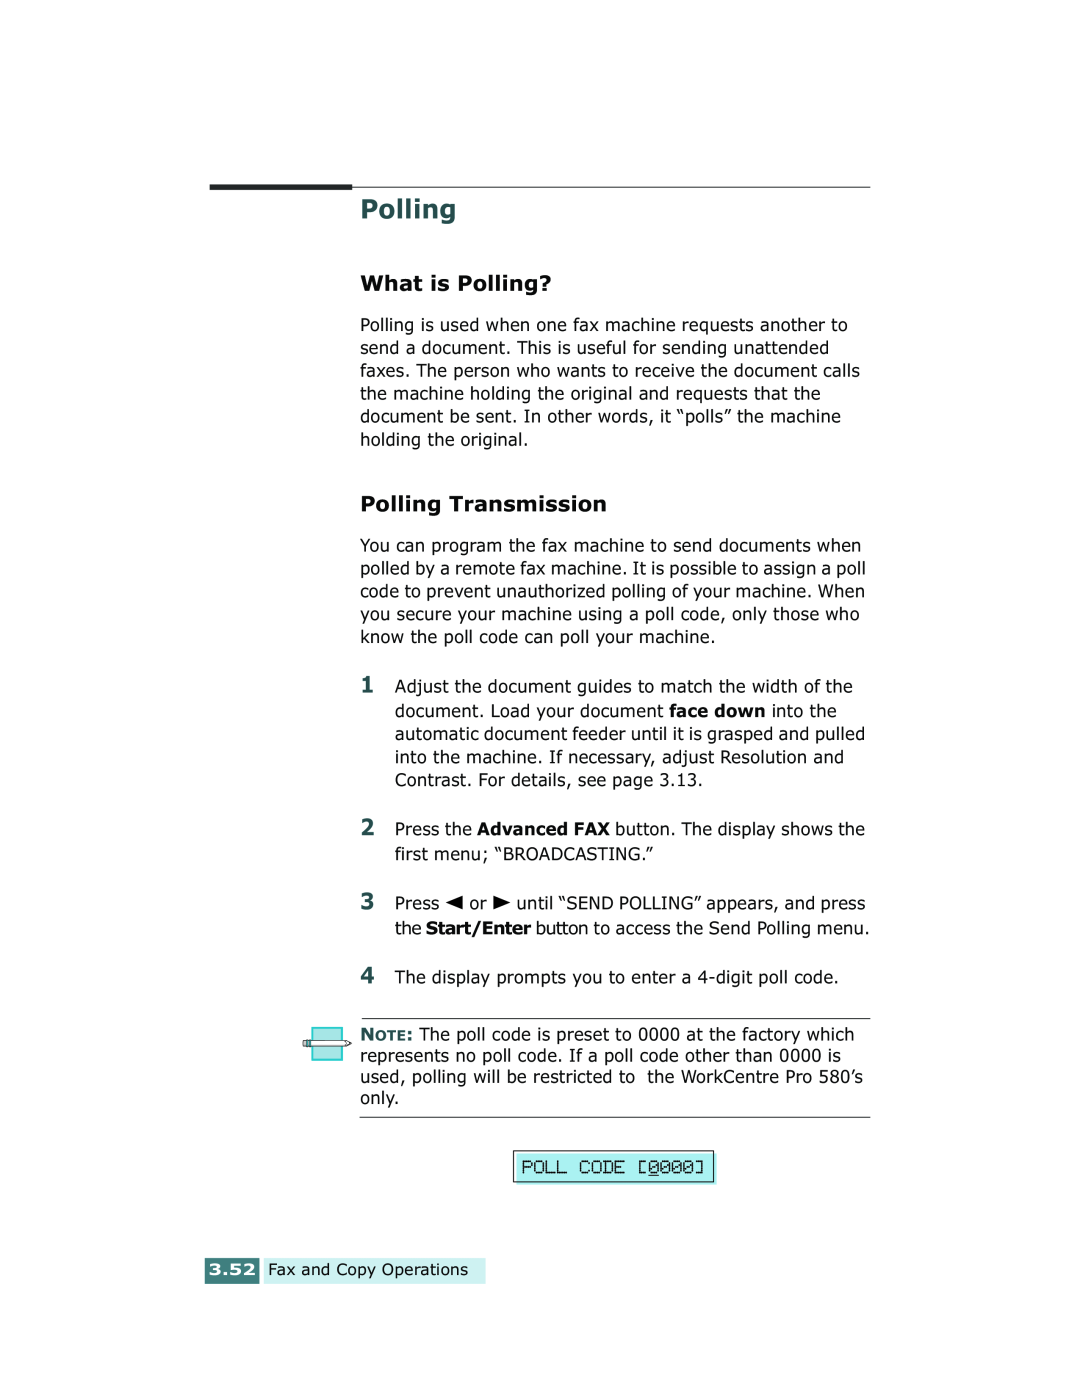 Xerox Pro 580 manual What is Polling?, Polling Transmission 